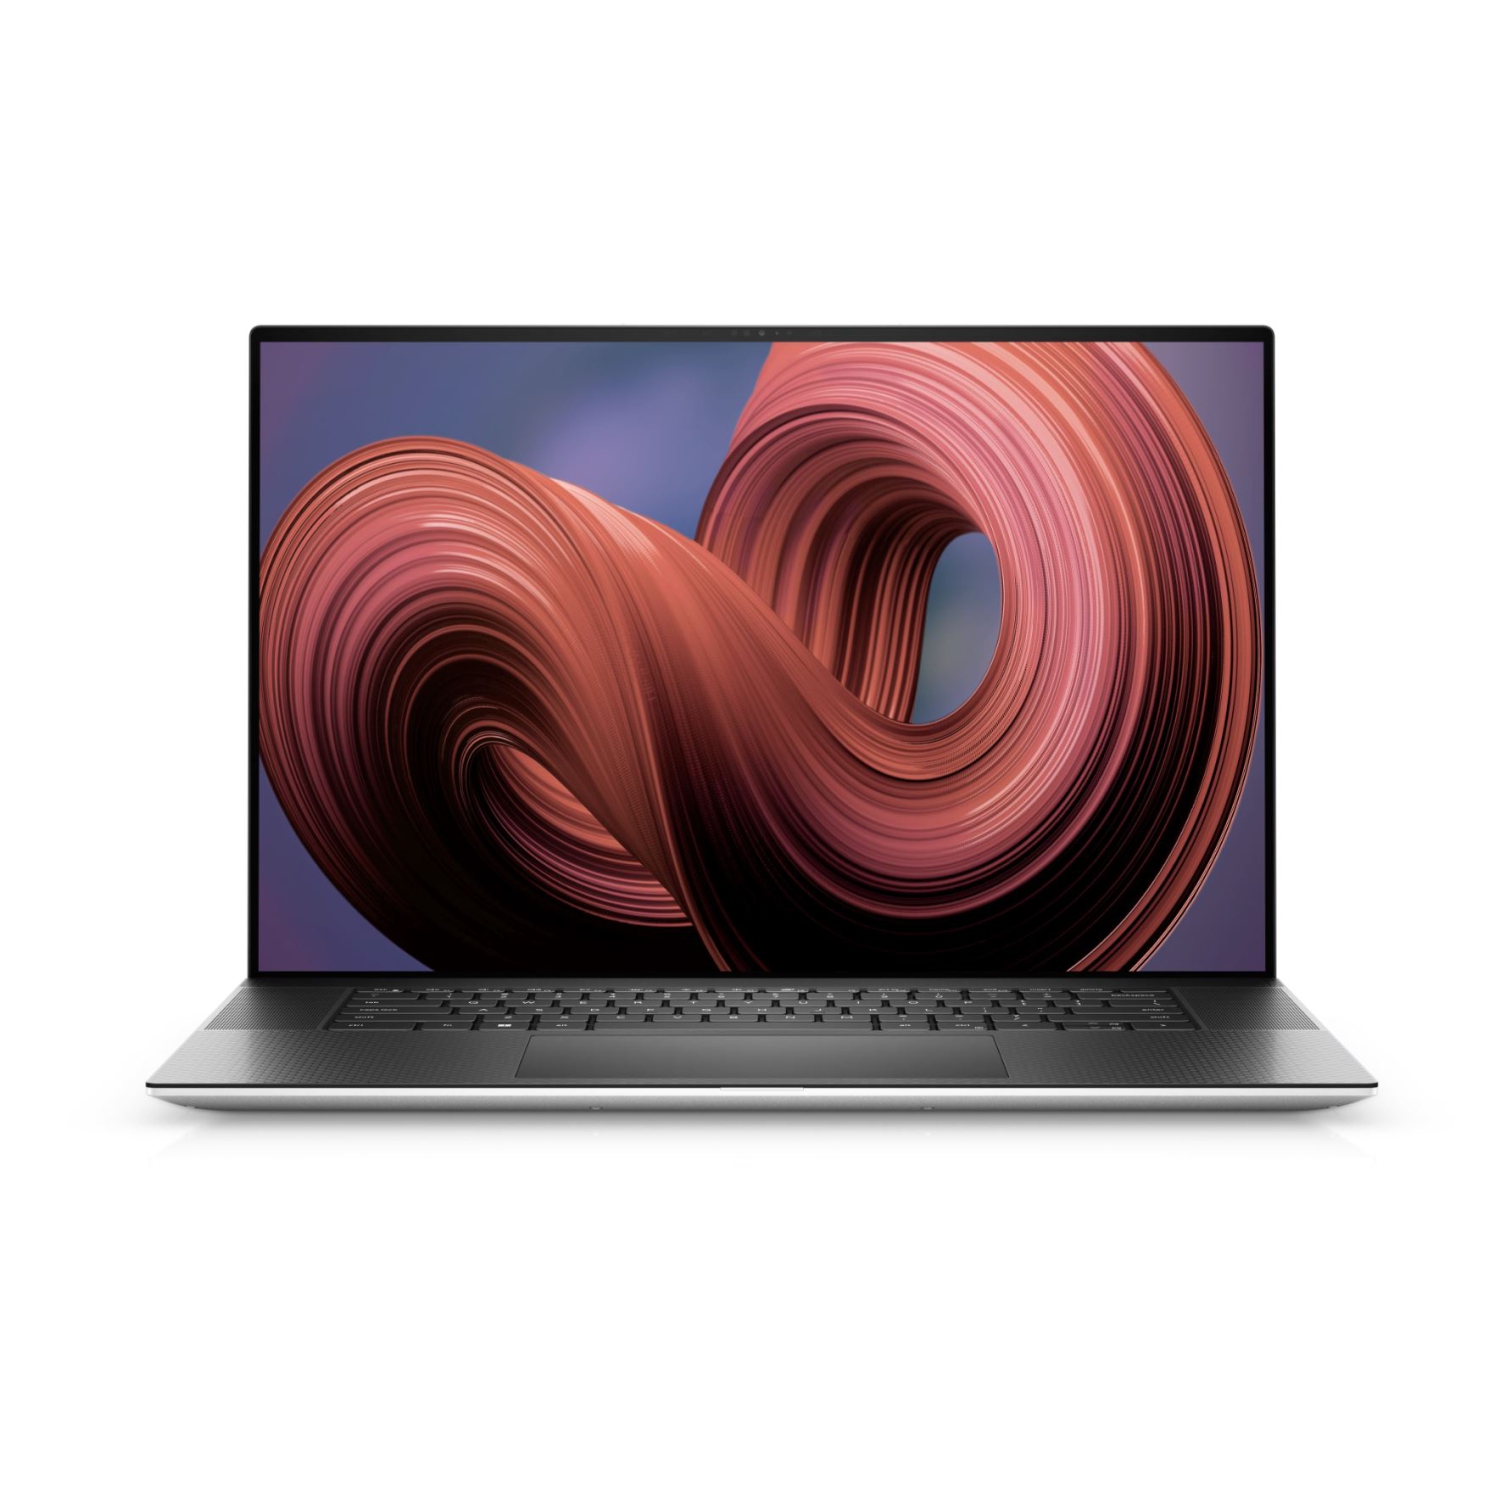 Dell XPS 17 9730, 17" UHD Touch, Nvidia RTX 4080, i9-13900H, 64GB RAM, 1TB SSD, WIN 11 Pro - Certified Refurbished